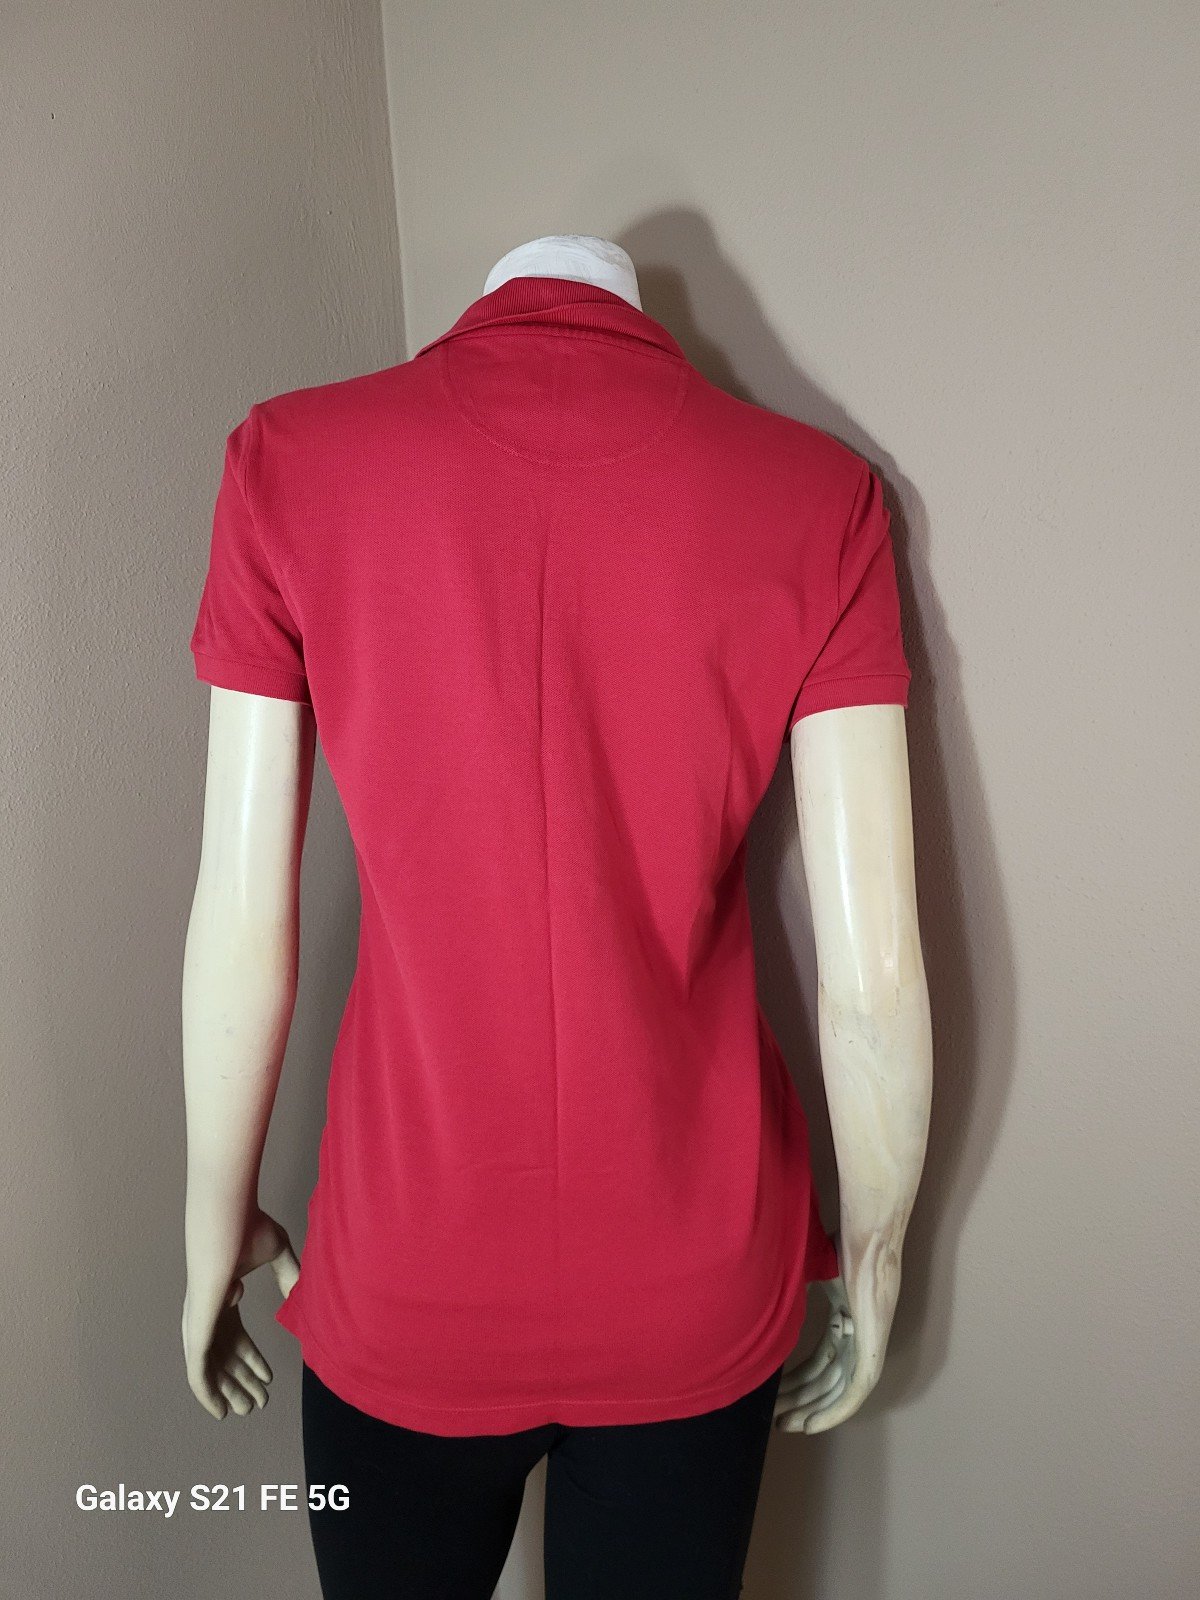 Promotions  Lacoste Womens Pink Polo Shirt Sz 42/L
.in Great Condition...no holes spots and FXzXywXmm Great